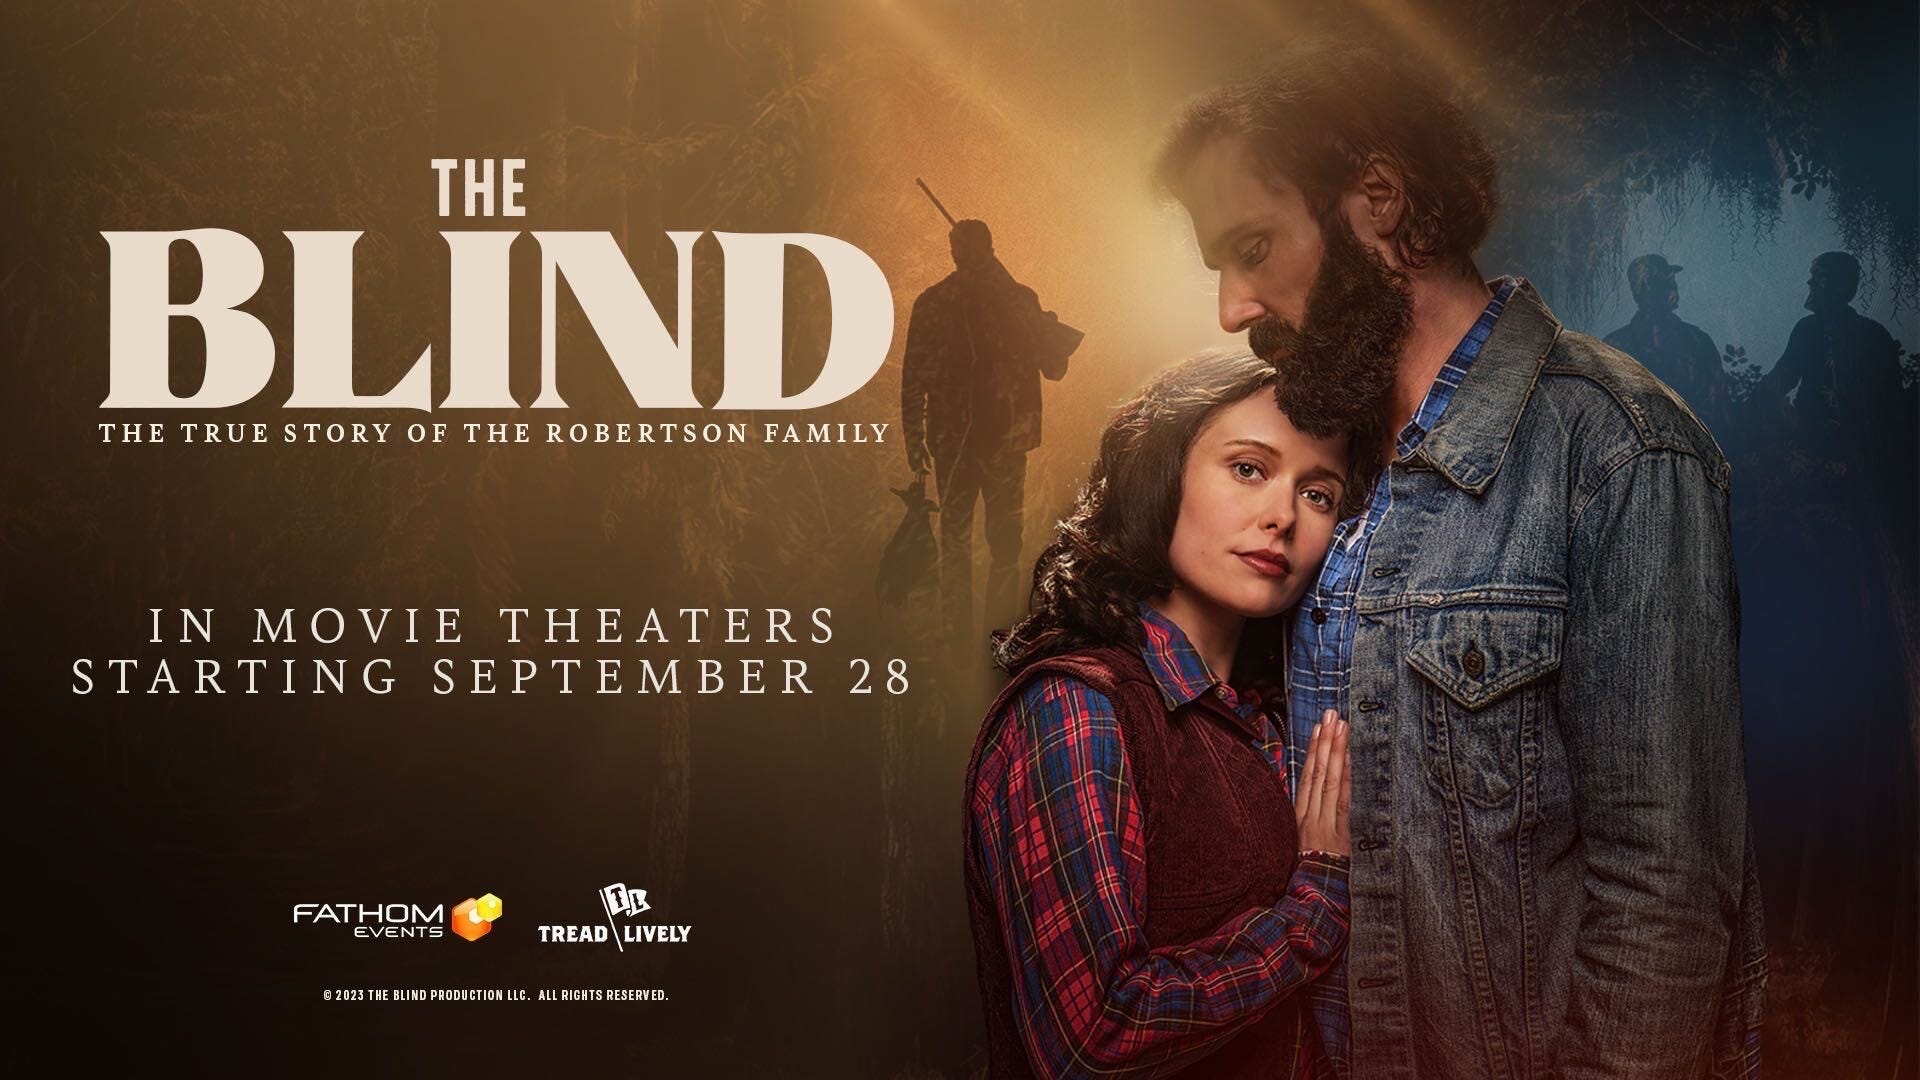 First Look at the Robertson Family's New Movie The Blind